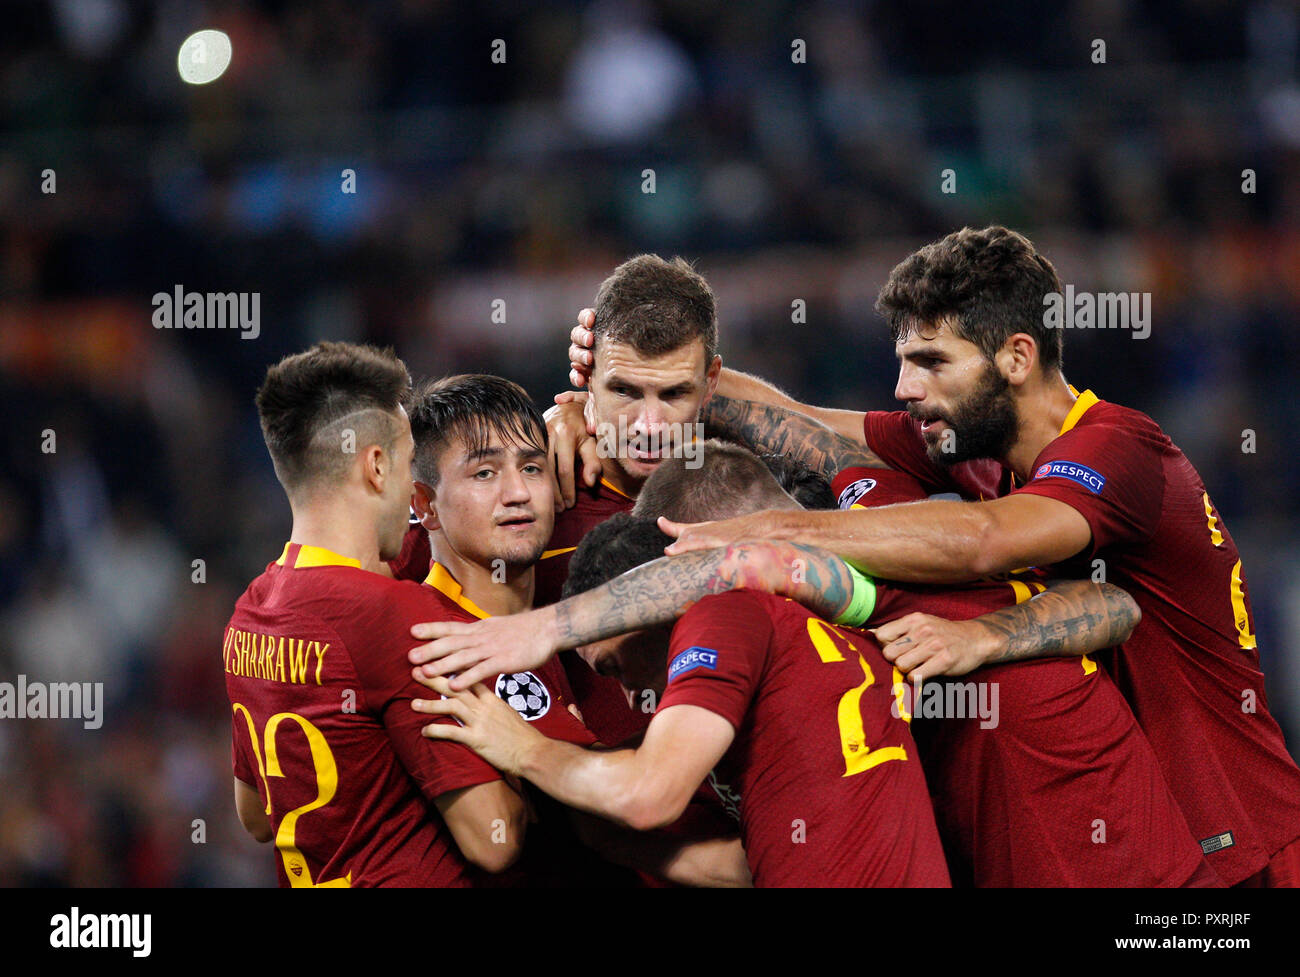 Rome, Italy, 23rd October, 2018. Roma's Edin Dzeko, third from left, celebrates with his teammates after scoring his second goal during the Champions League Group G soccer match between Roma and CSKA Moscow at the Olympic Stadium. Roma won 3-0. © Riccardo De Luca UPDATE IMAGES/ Alamy Live News Stock Photo